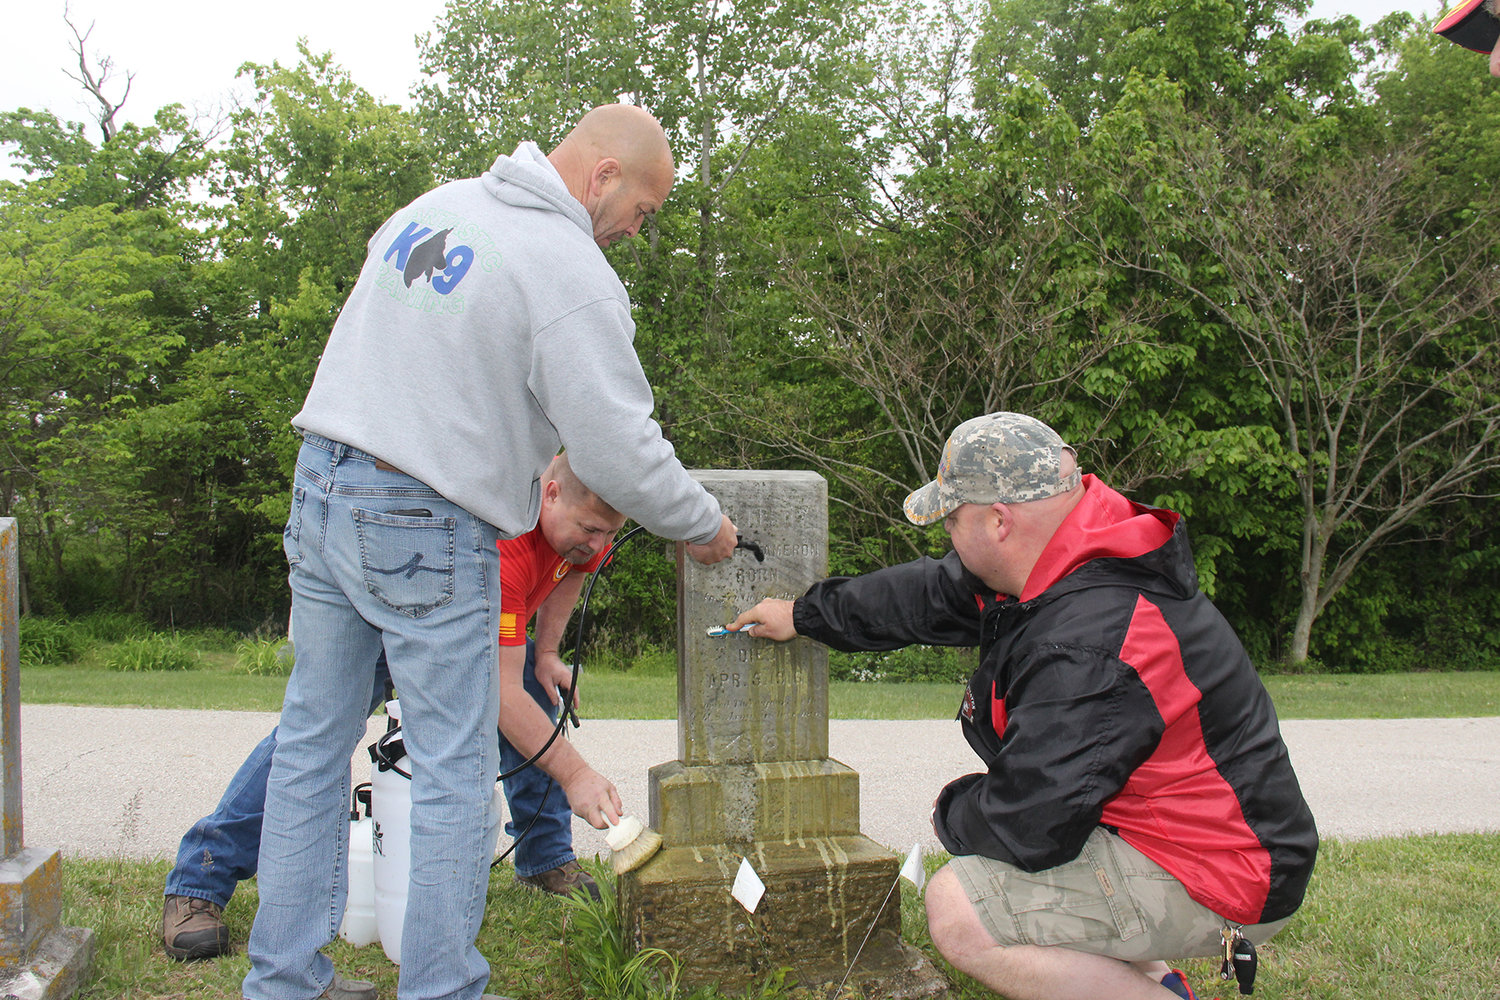 Warrenton Marine Corps League members Mike Weicht, Erick Rasche and Ryan Petras work together to clean the headstone of a 19th-century veteran buried at the Warrenton City Cemetery on Saturday, May 15. Green lichen and grime can be seen getting washed away with the help of a special chemical.